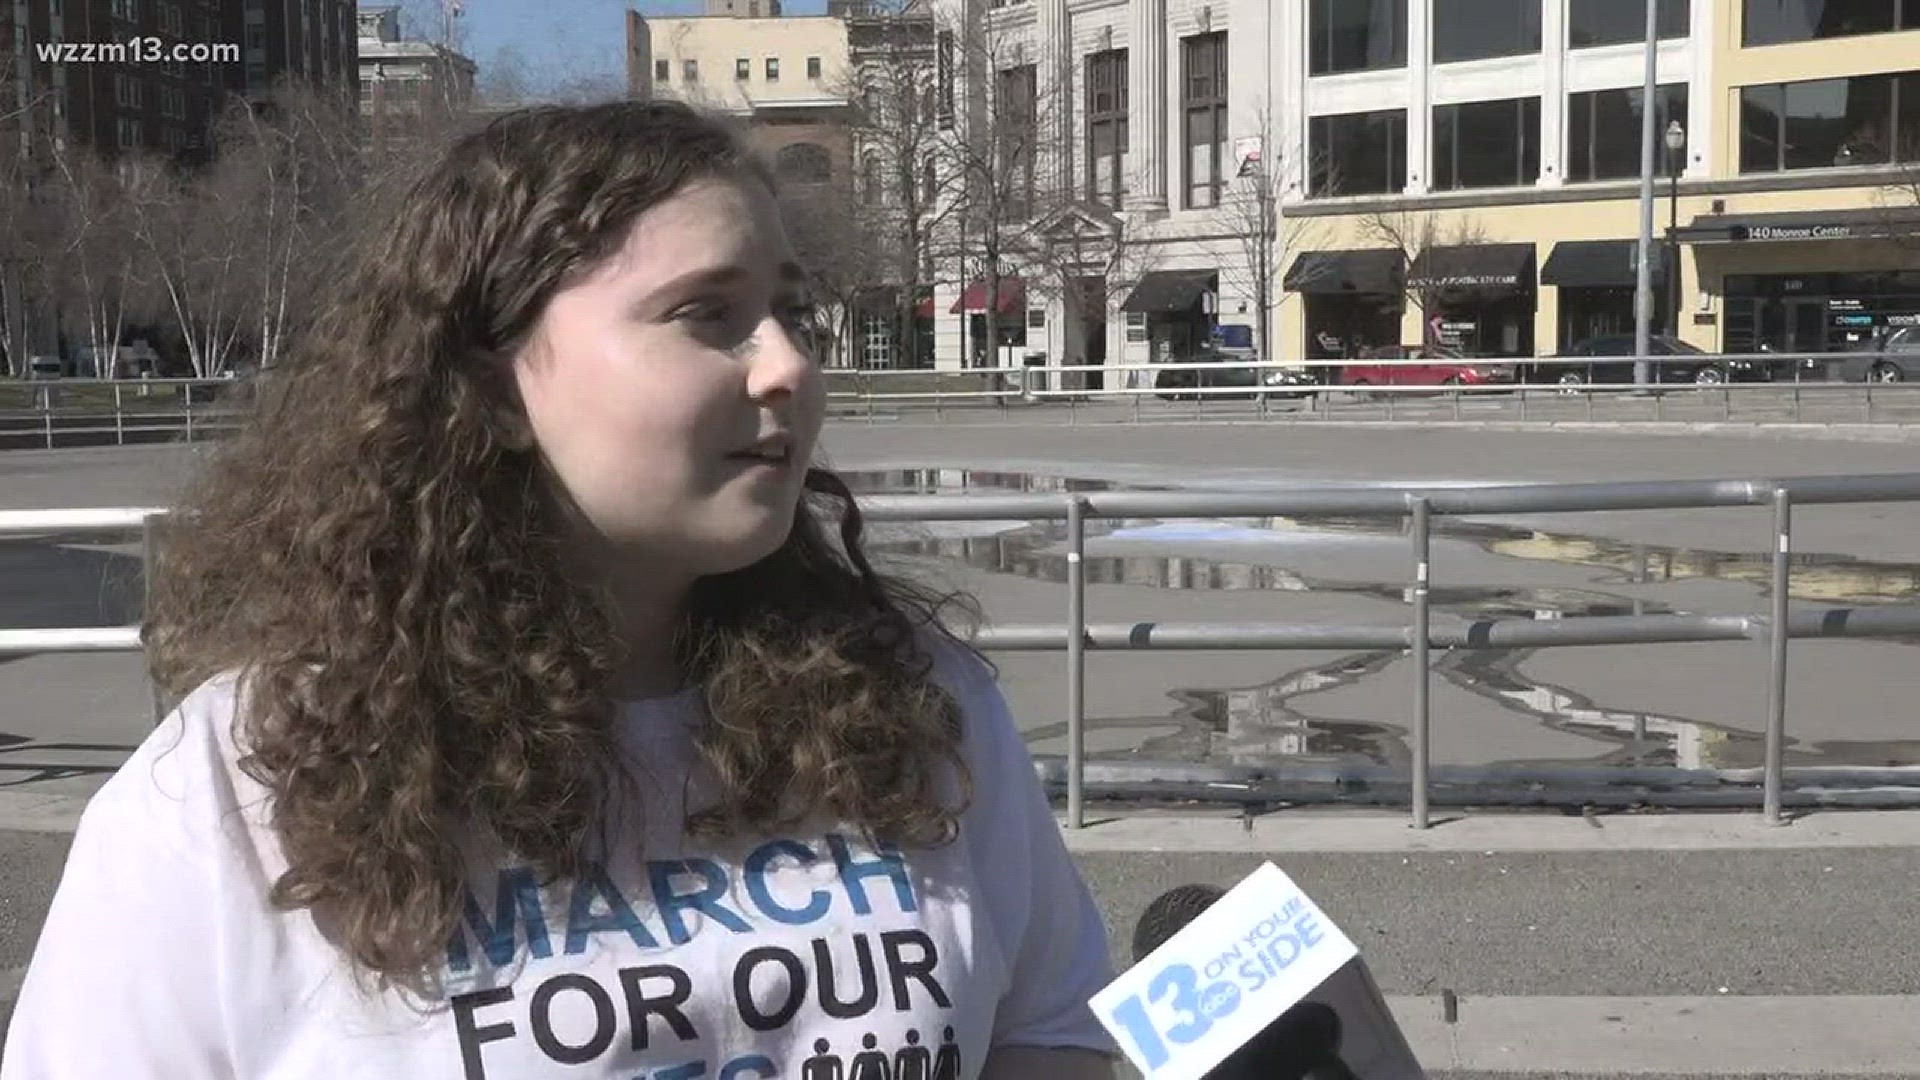 Hundreds expected to March for Our Lives in West Michigan